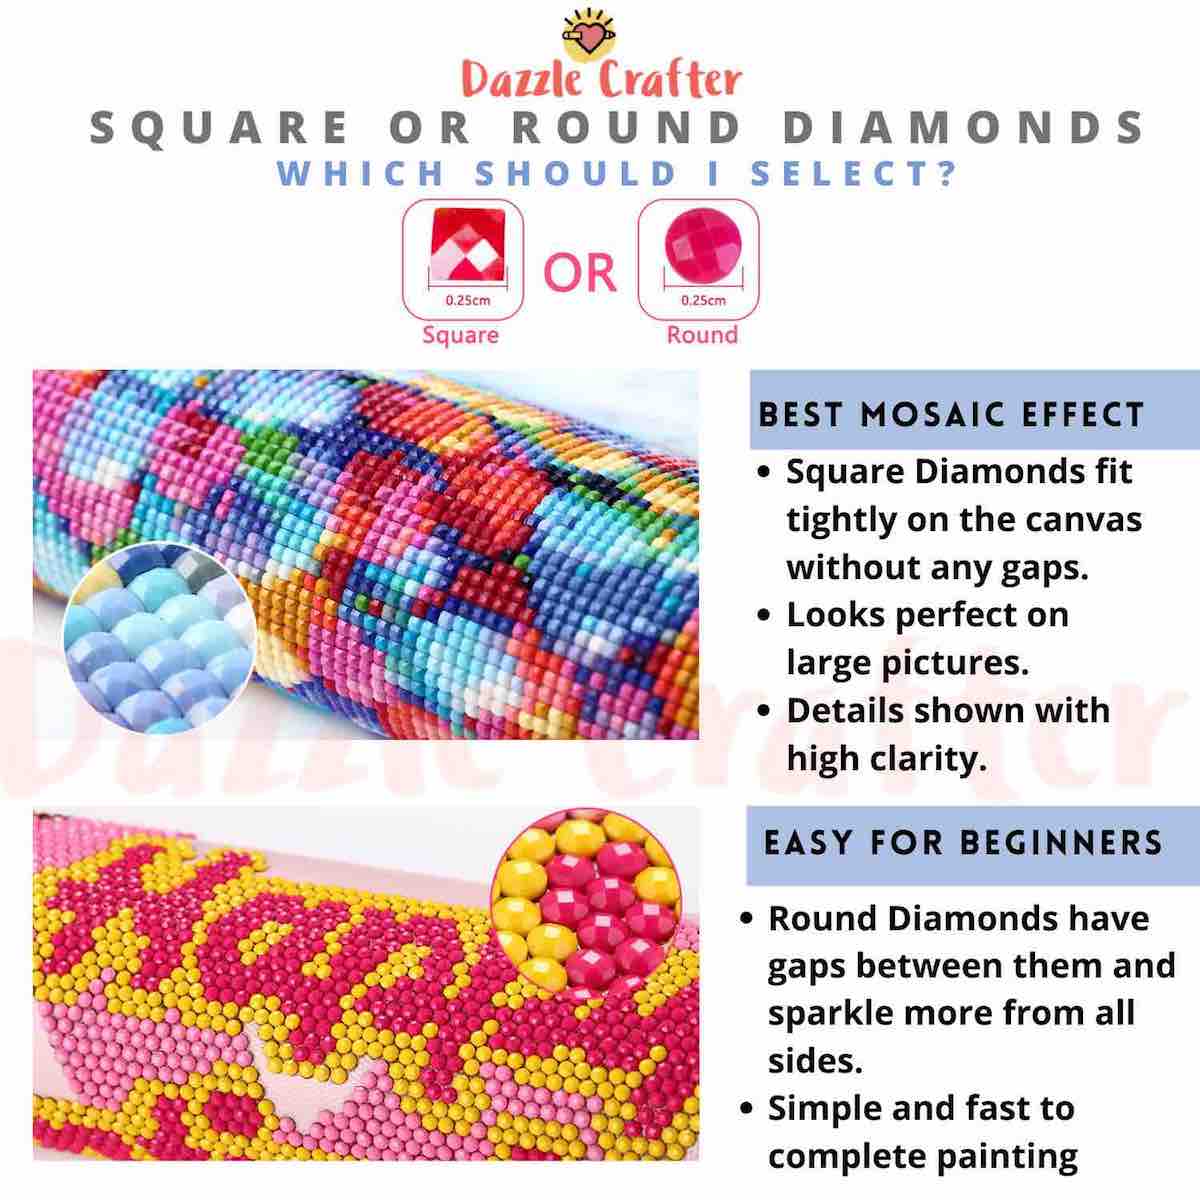 HOW TO CHOOSE SQUARE OR ROUND DIAMONDS FOR DIAMOND PAINTING